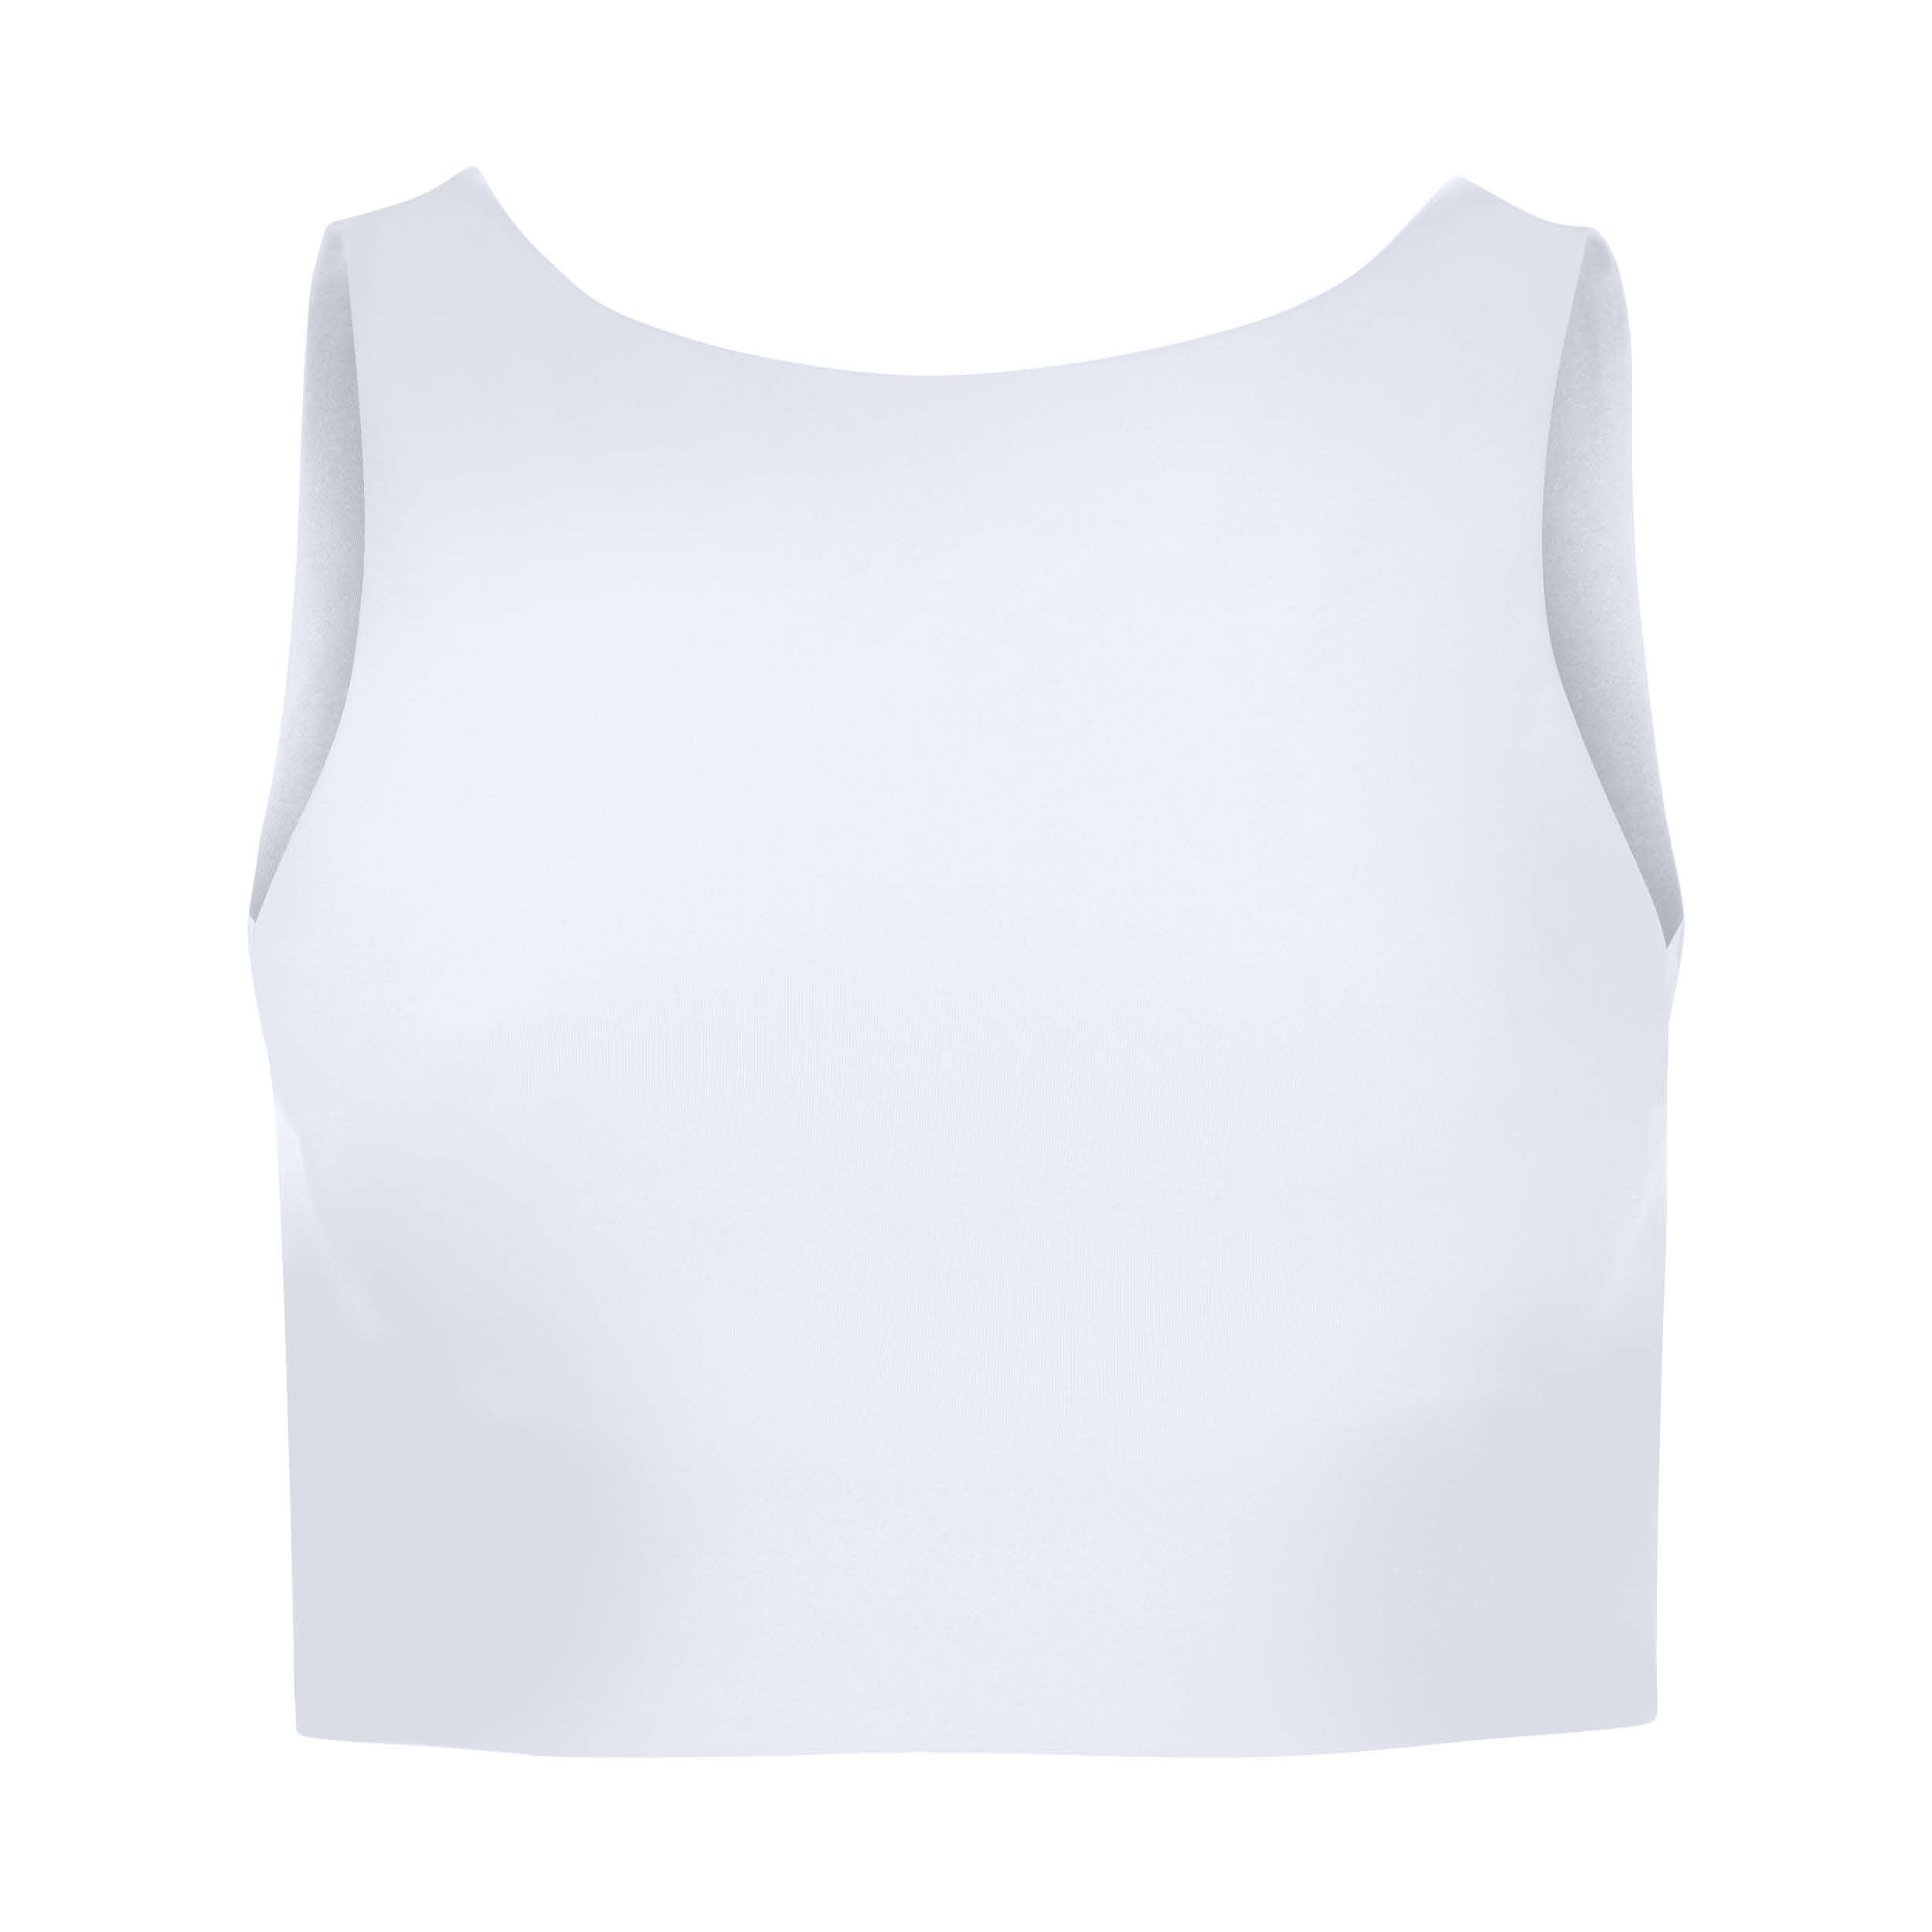 Lovemaker: The Backless Crop Top